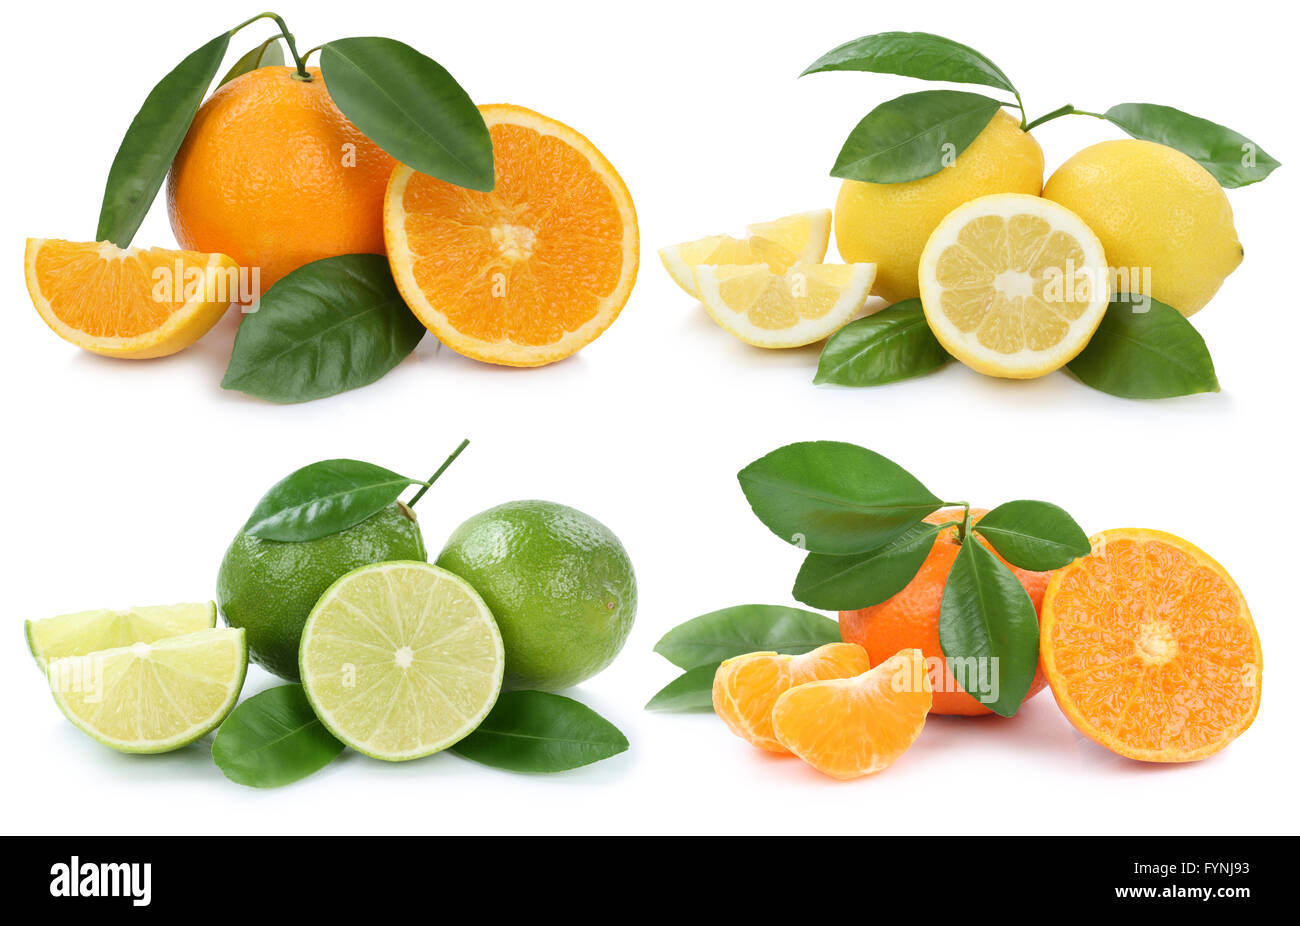 Collection of oranges lemons fruits isolated on a white background Stock Photo